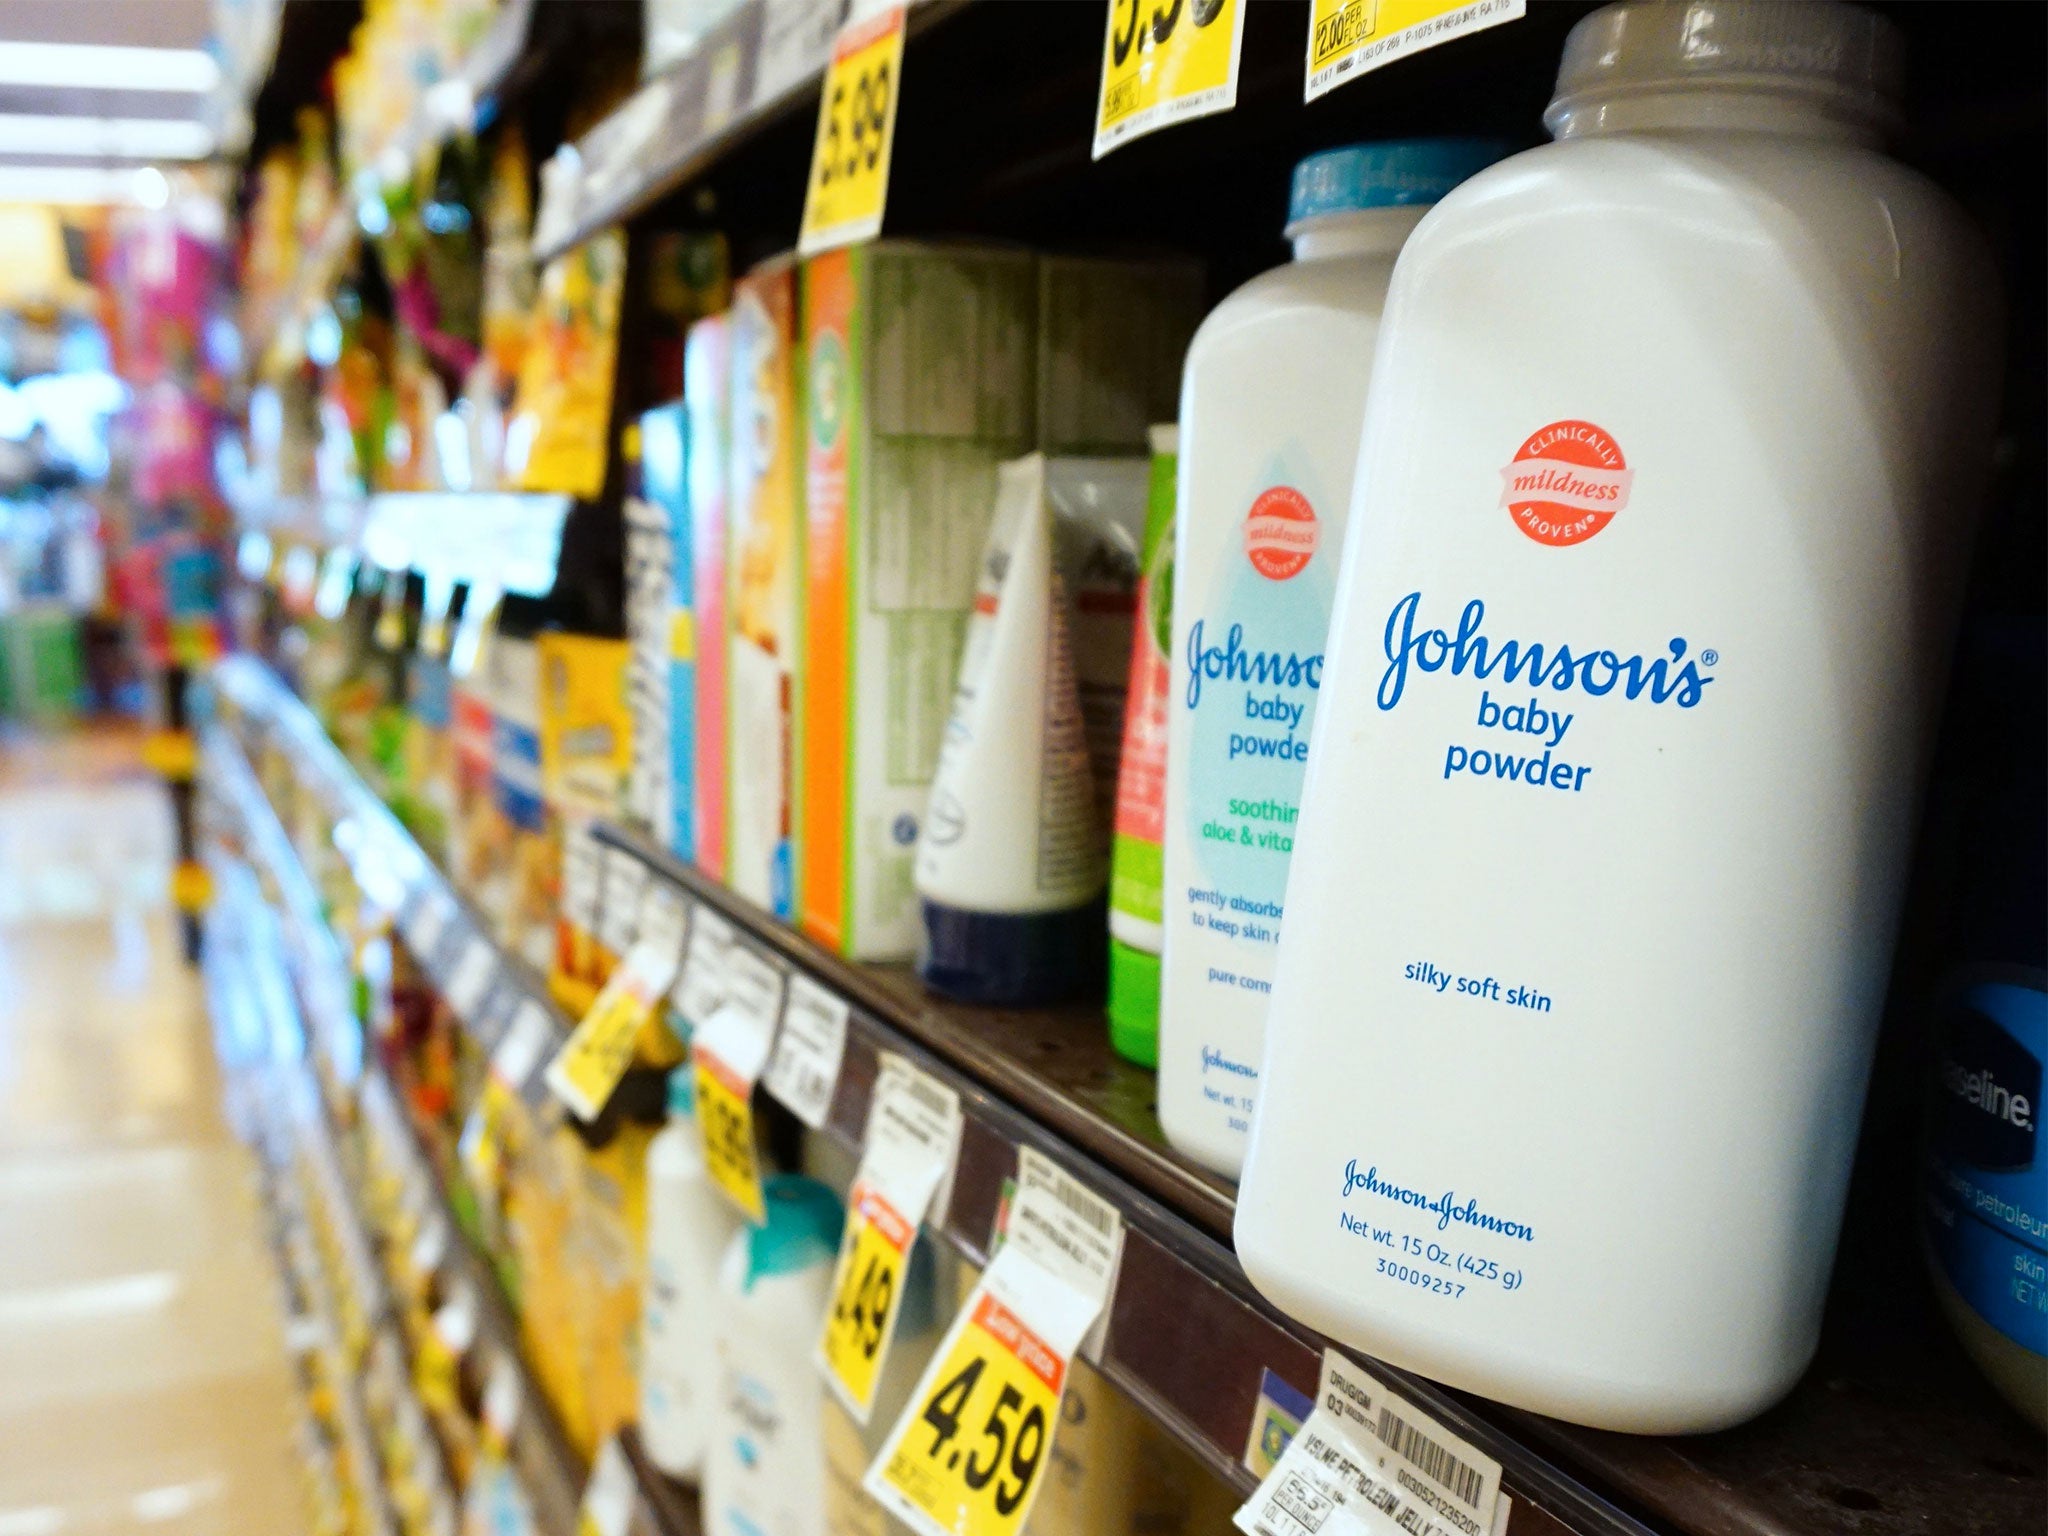 Johnson & Johnson is fighting thousands of cases relating to claims its talcum powder products cause cancer